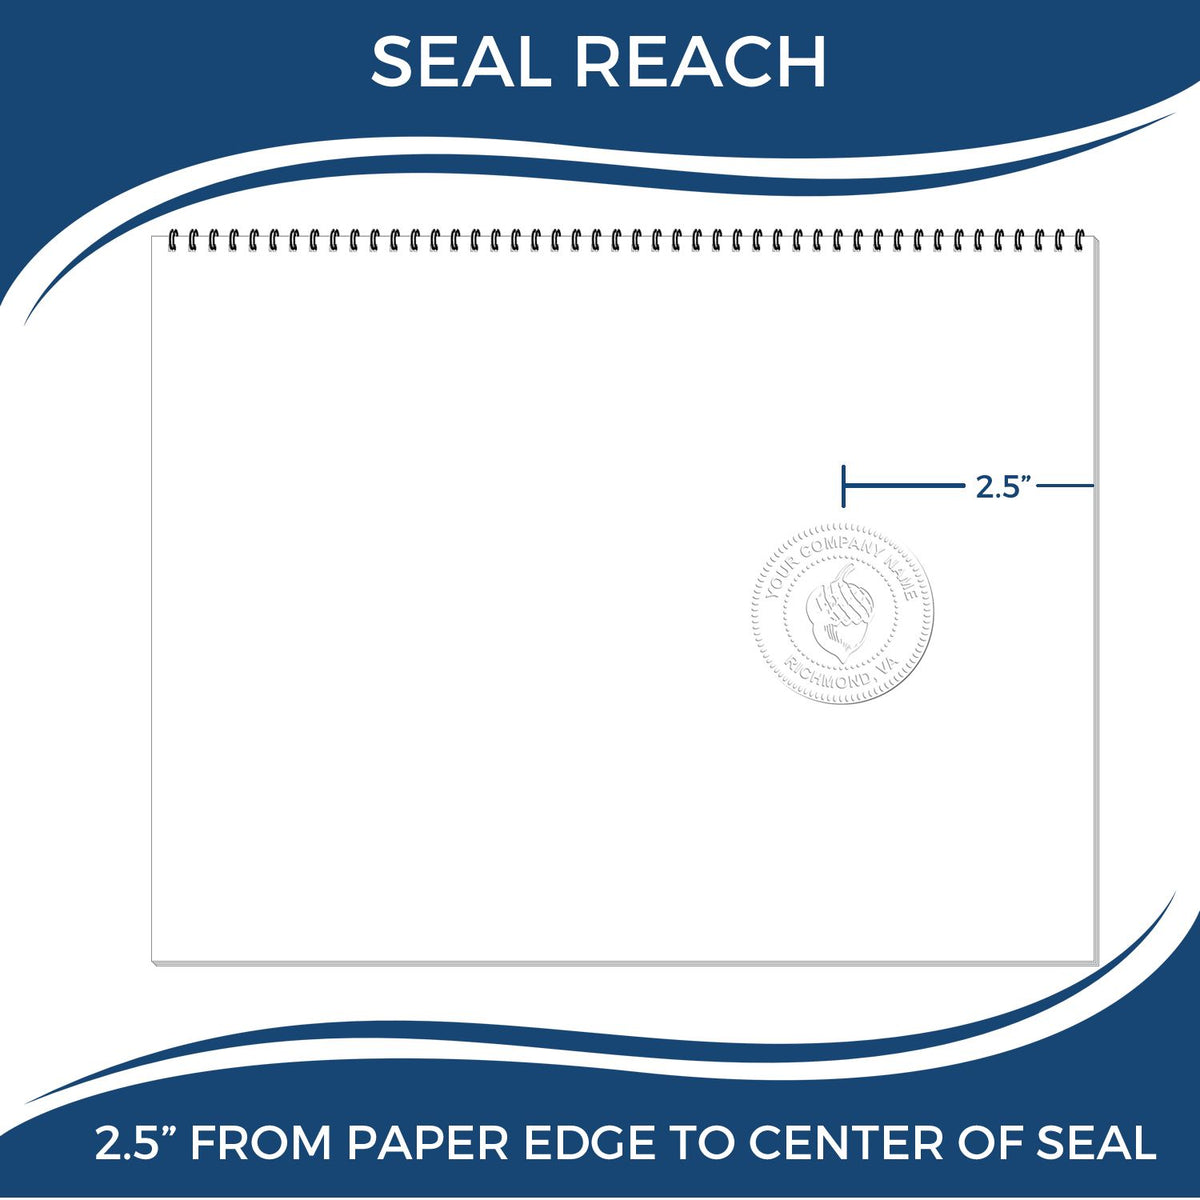 An infographic showing the seal reach which is represented by a ruler and a miniature seal image of the Heavy Duty Cast Iron District of Columbia Engineer Seal Embosser